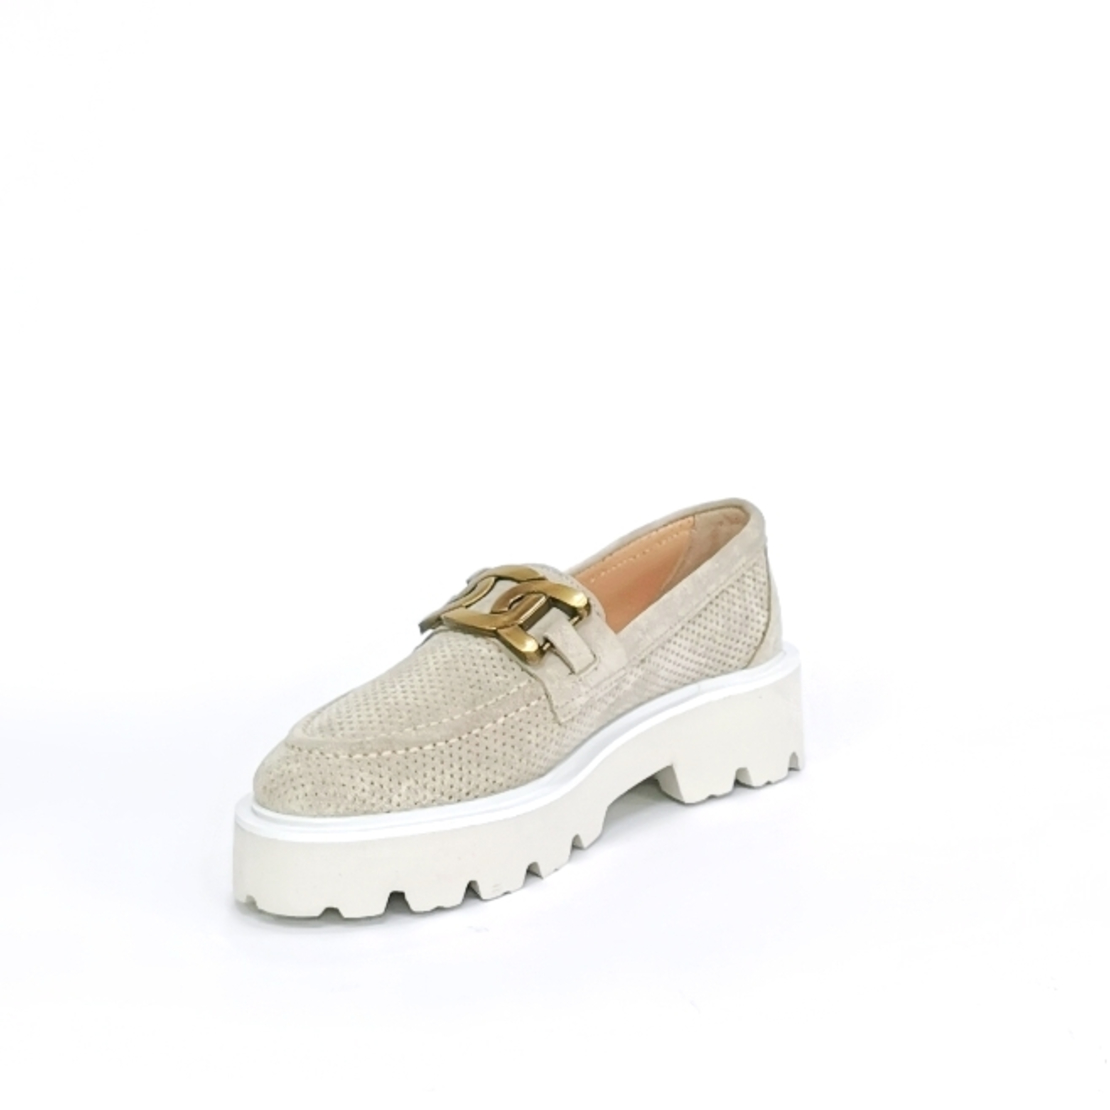 Women's moccasins made of natural leather in gray color/74219